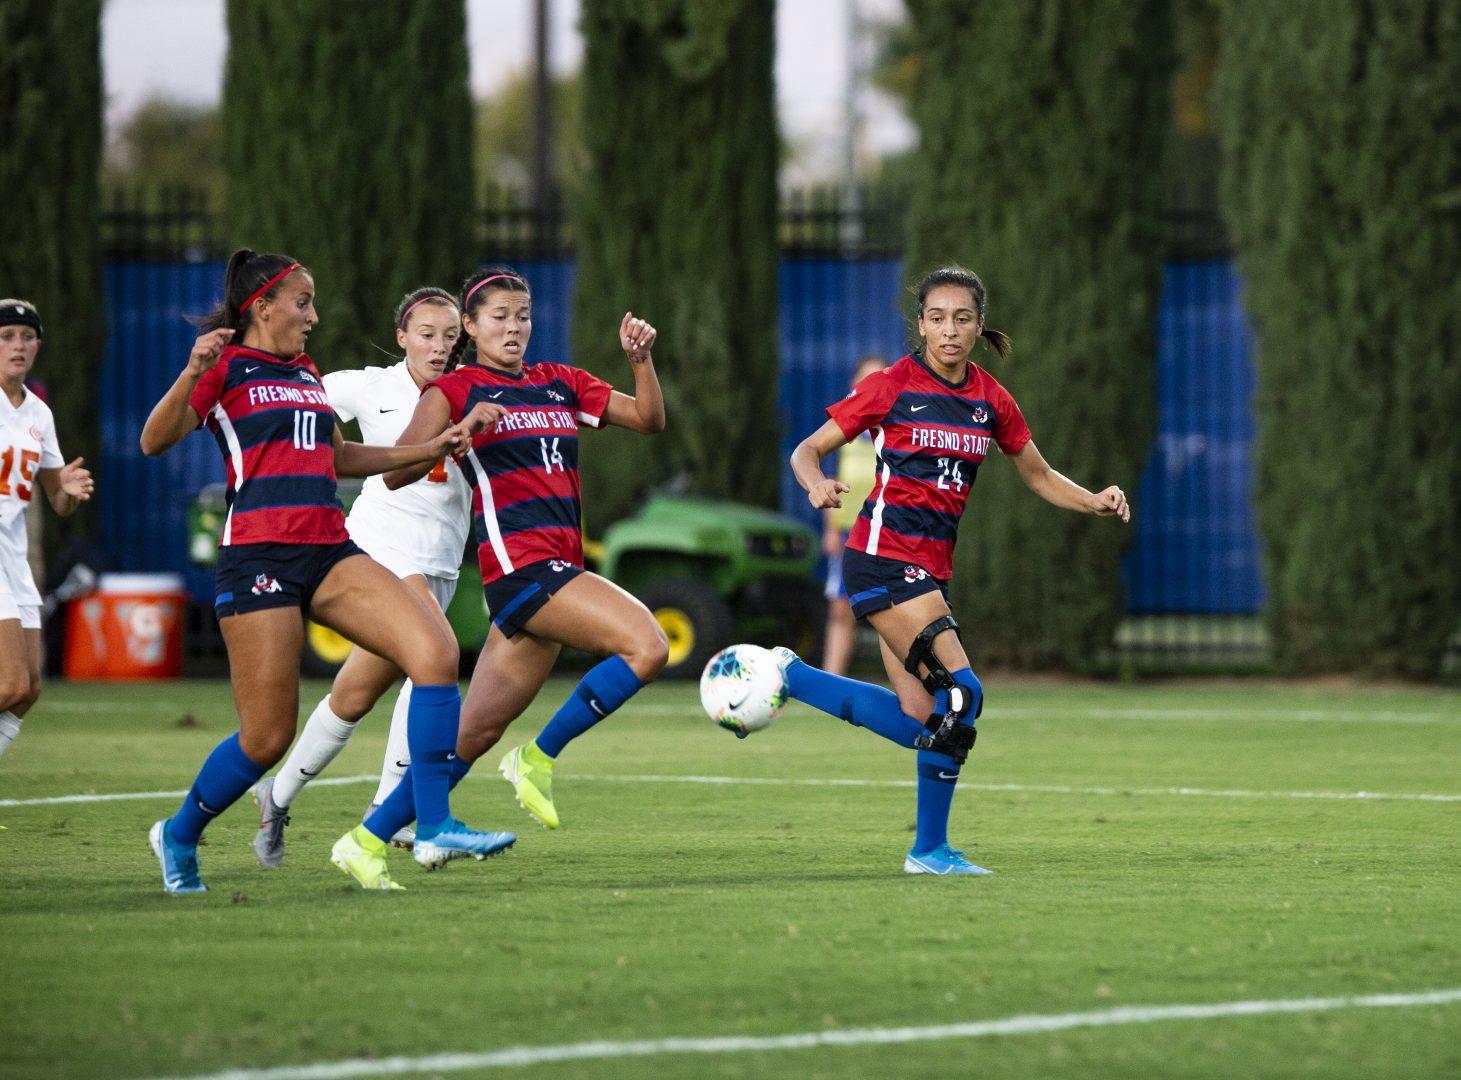 (From left to right) Fresno State soccer players Mariona Segales, Melissa Ellis and Emma Chivers running the ball down the field against University of the Pacific on Sunday, Sept. 1, 2019. (Larry Valenzuela/ The Collegian)